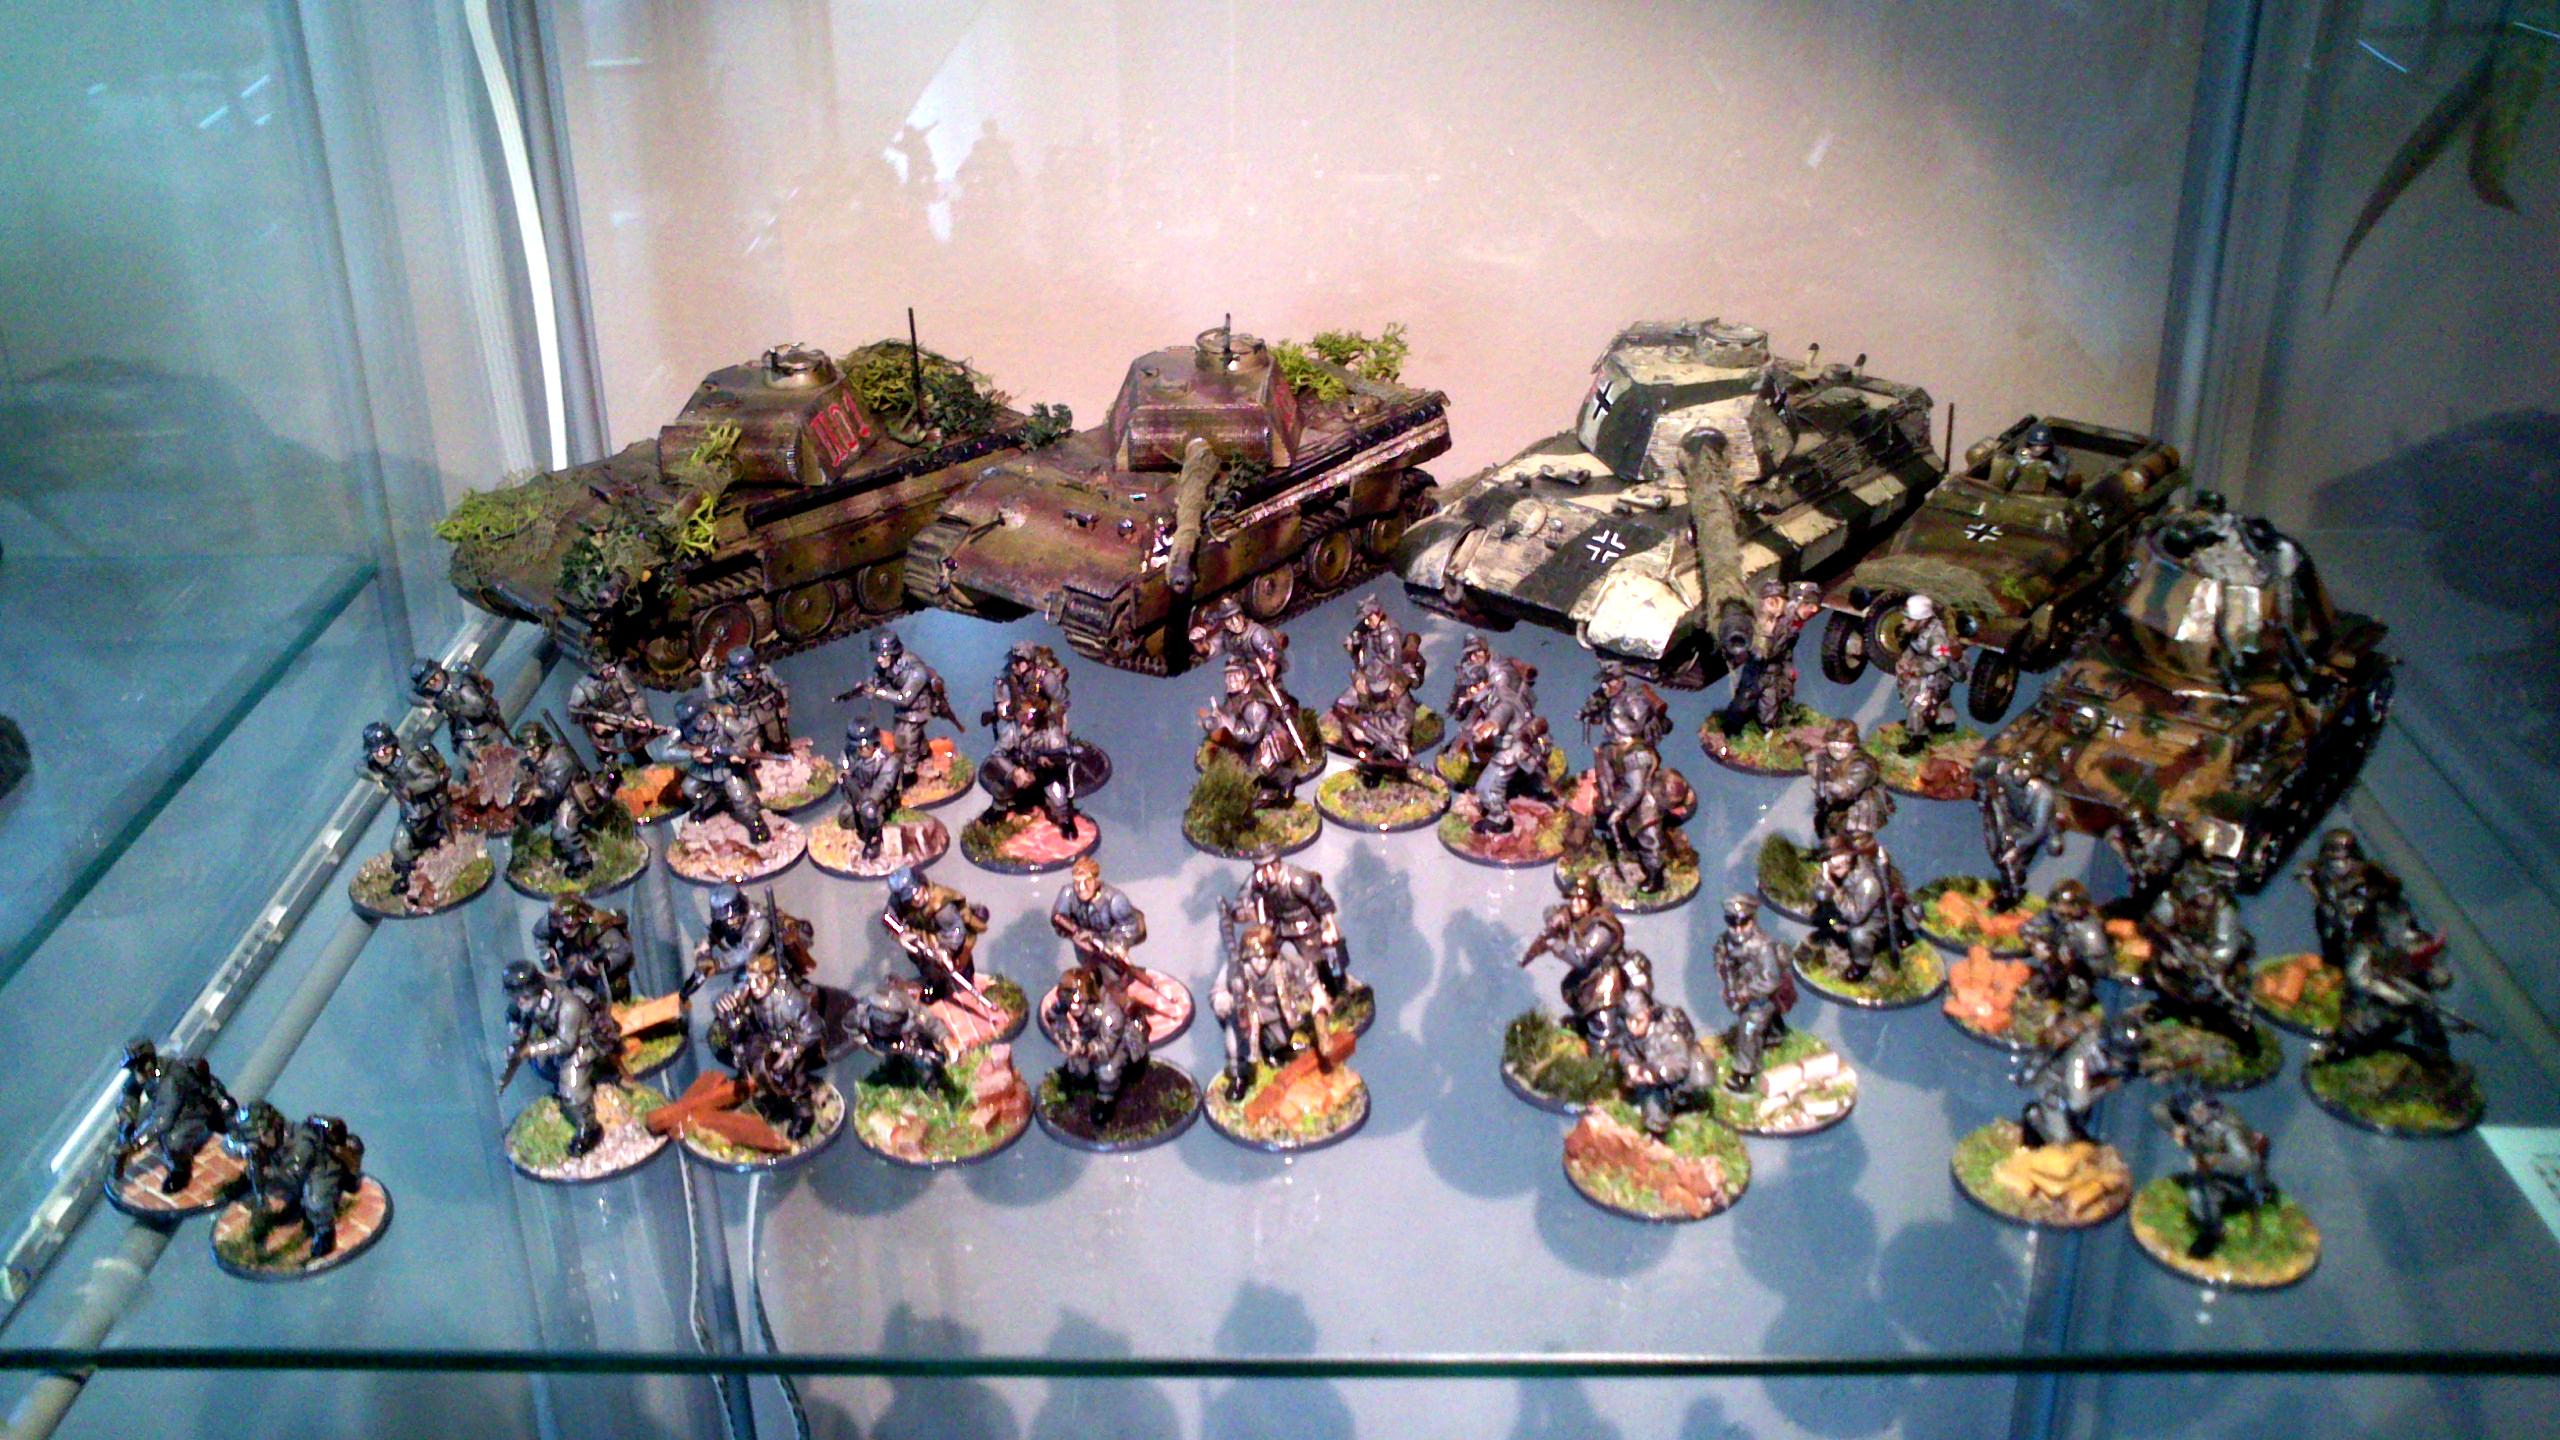 1/56, 28mm, Aa, America, Army, Blood Angels, Bolt Action, Flakpanzer, Flakpanzer Iv, Germans, Germany, Heer, Hellcat, Infantry, Konigstiger, Painted, Panther, Panthers, Panzer Iv Aa, Panzergrenadiers, Pershing, Rangers, Sdkfz, Sherman, Spaa, Tank, Tiger 2, Tiger Ii, Tiger2, Waffen, Warlord, West Wind, Whirbelwind, Whirlwind, Wirbelwind